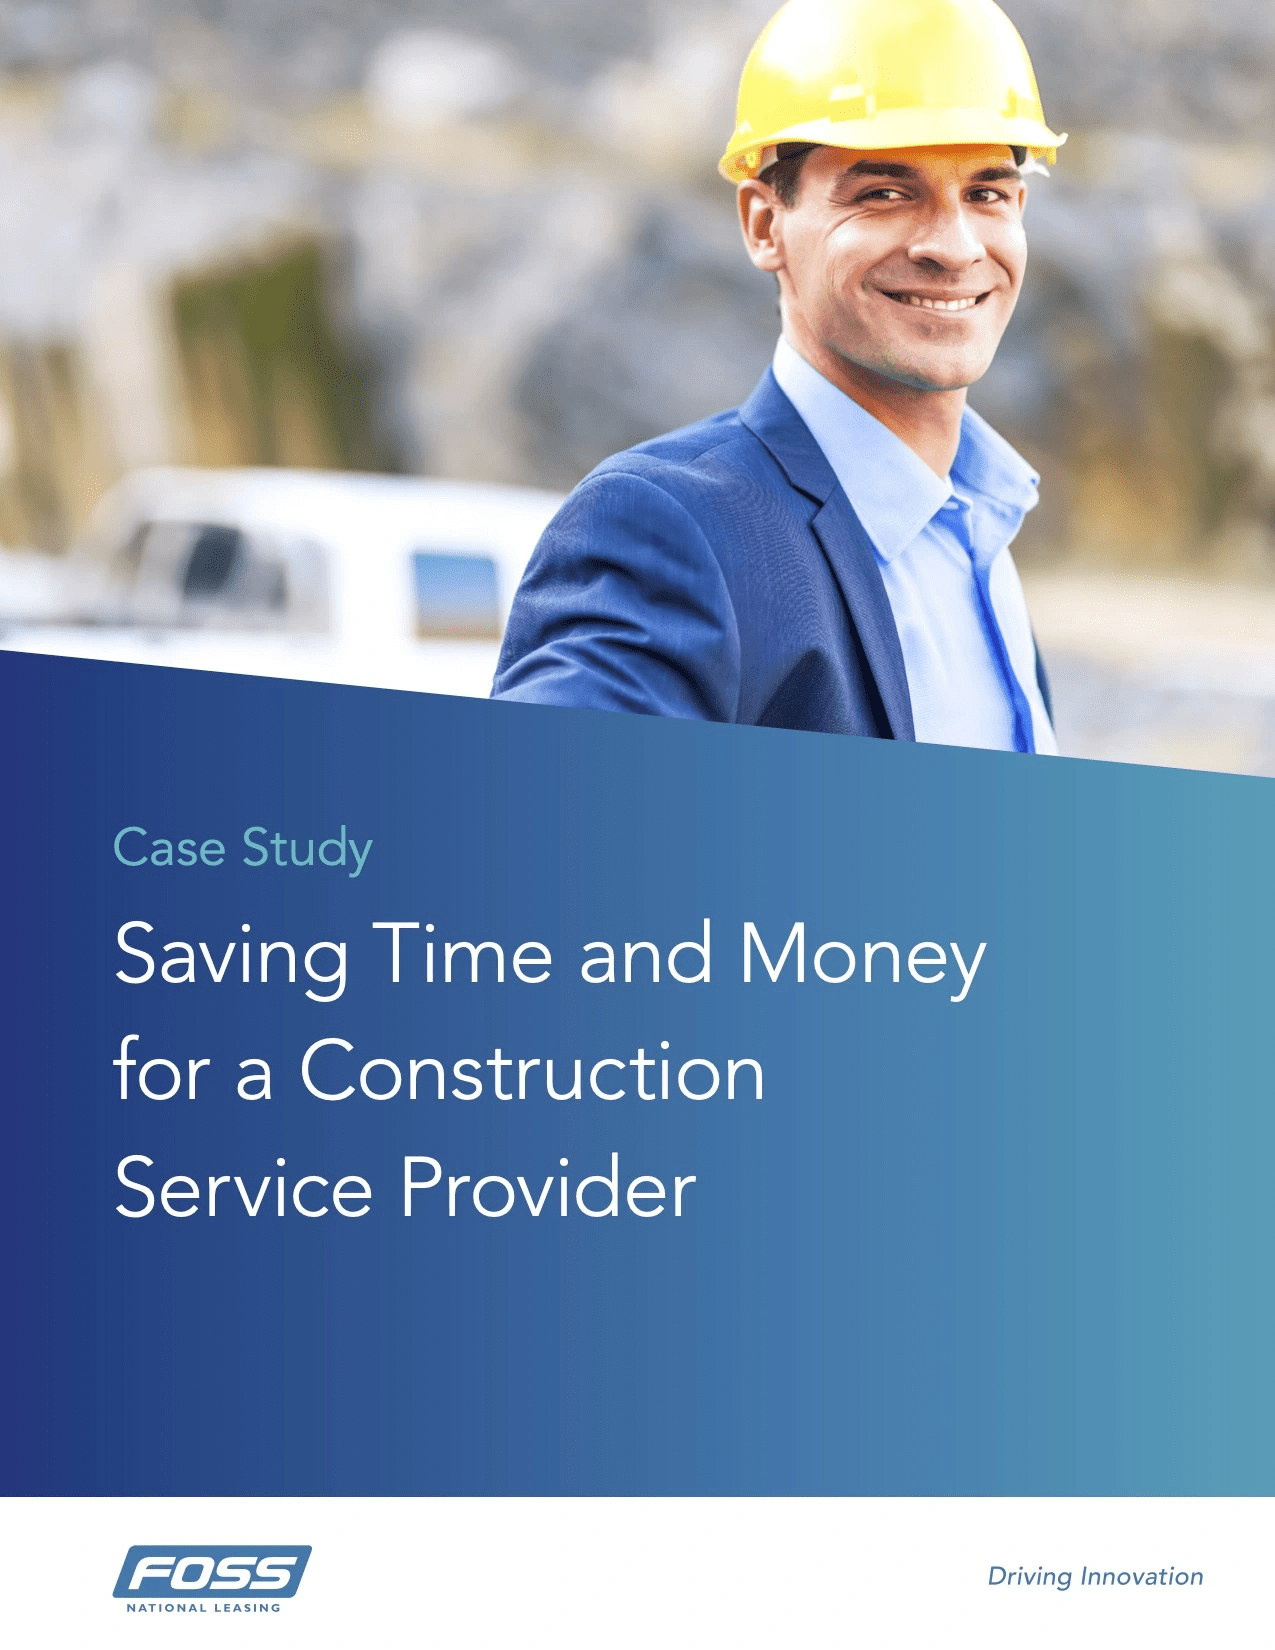 Case Study: Saving Time and Money for a Construction Provider